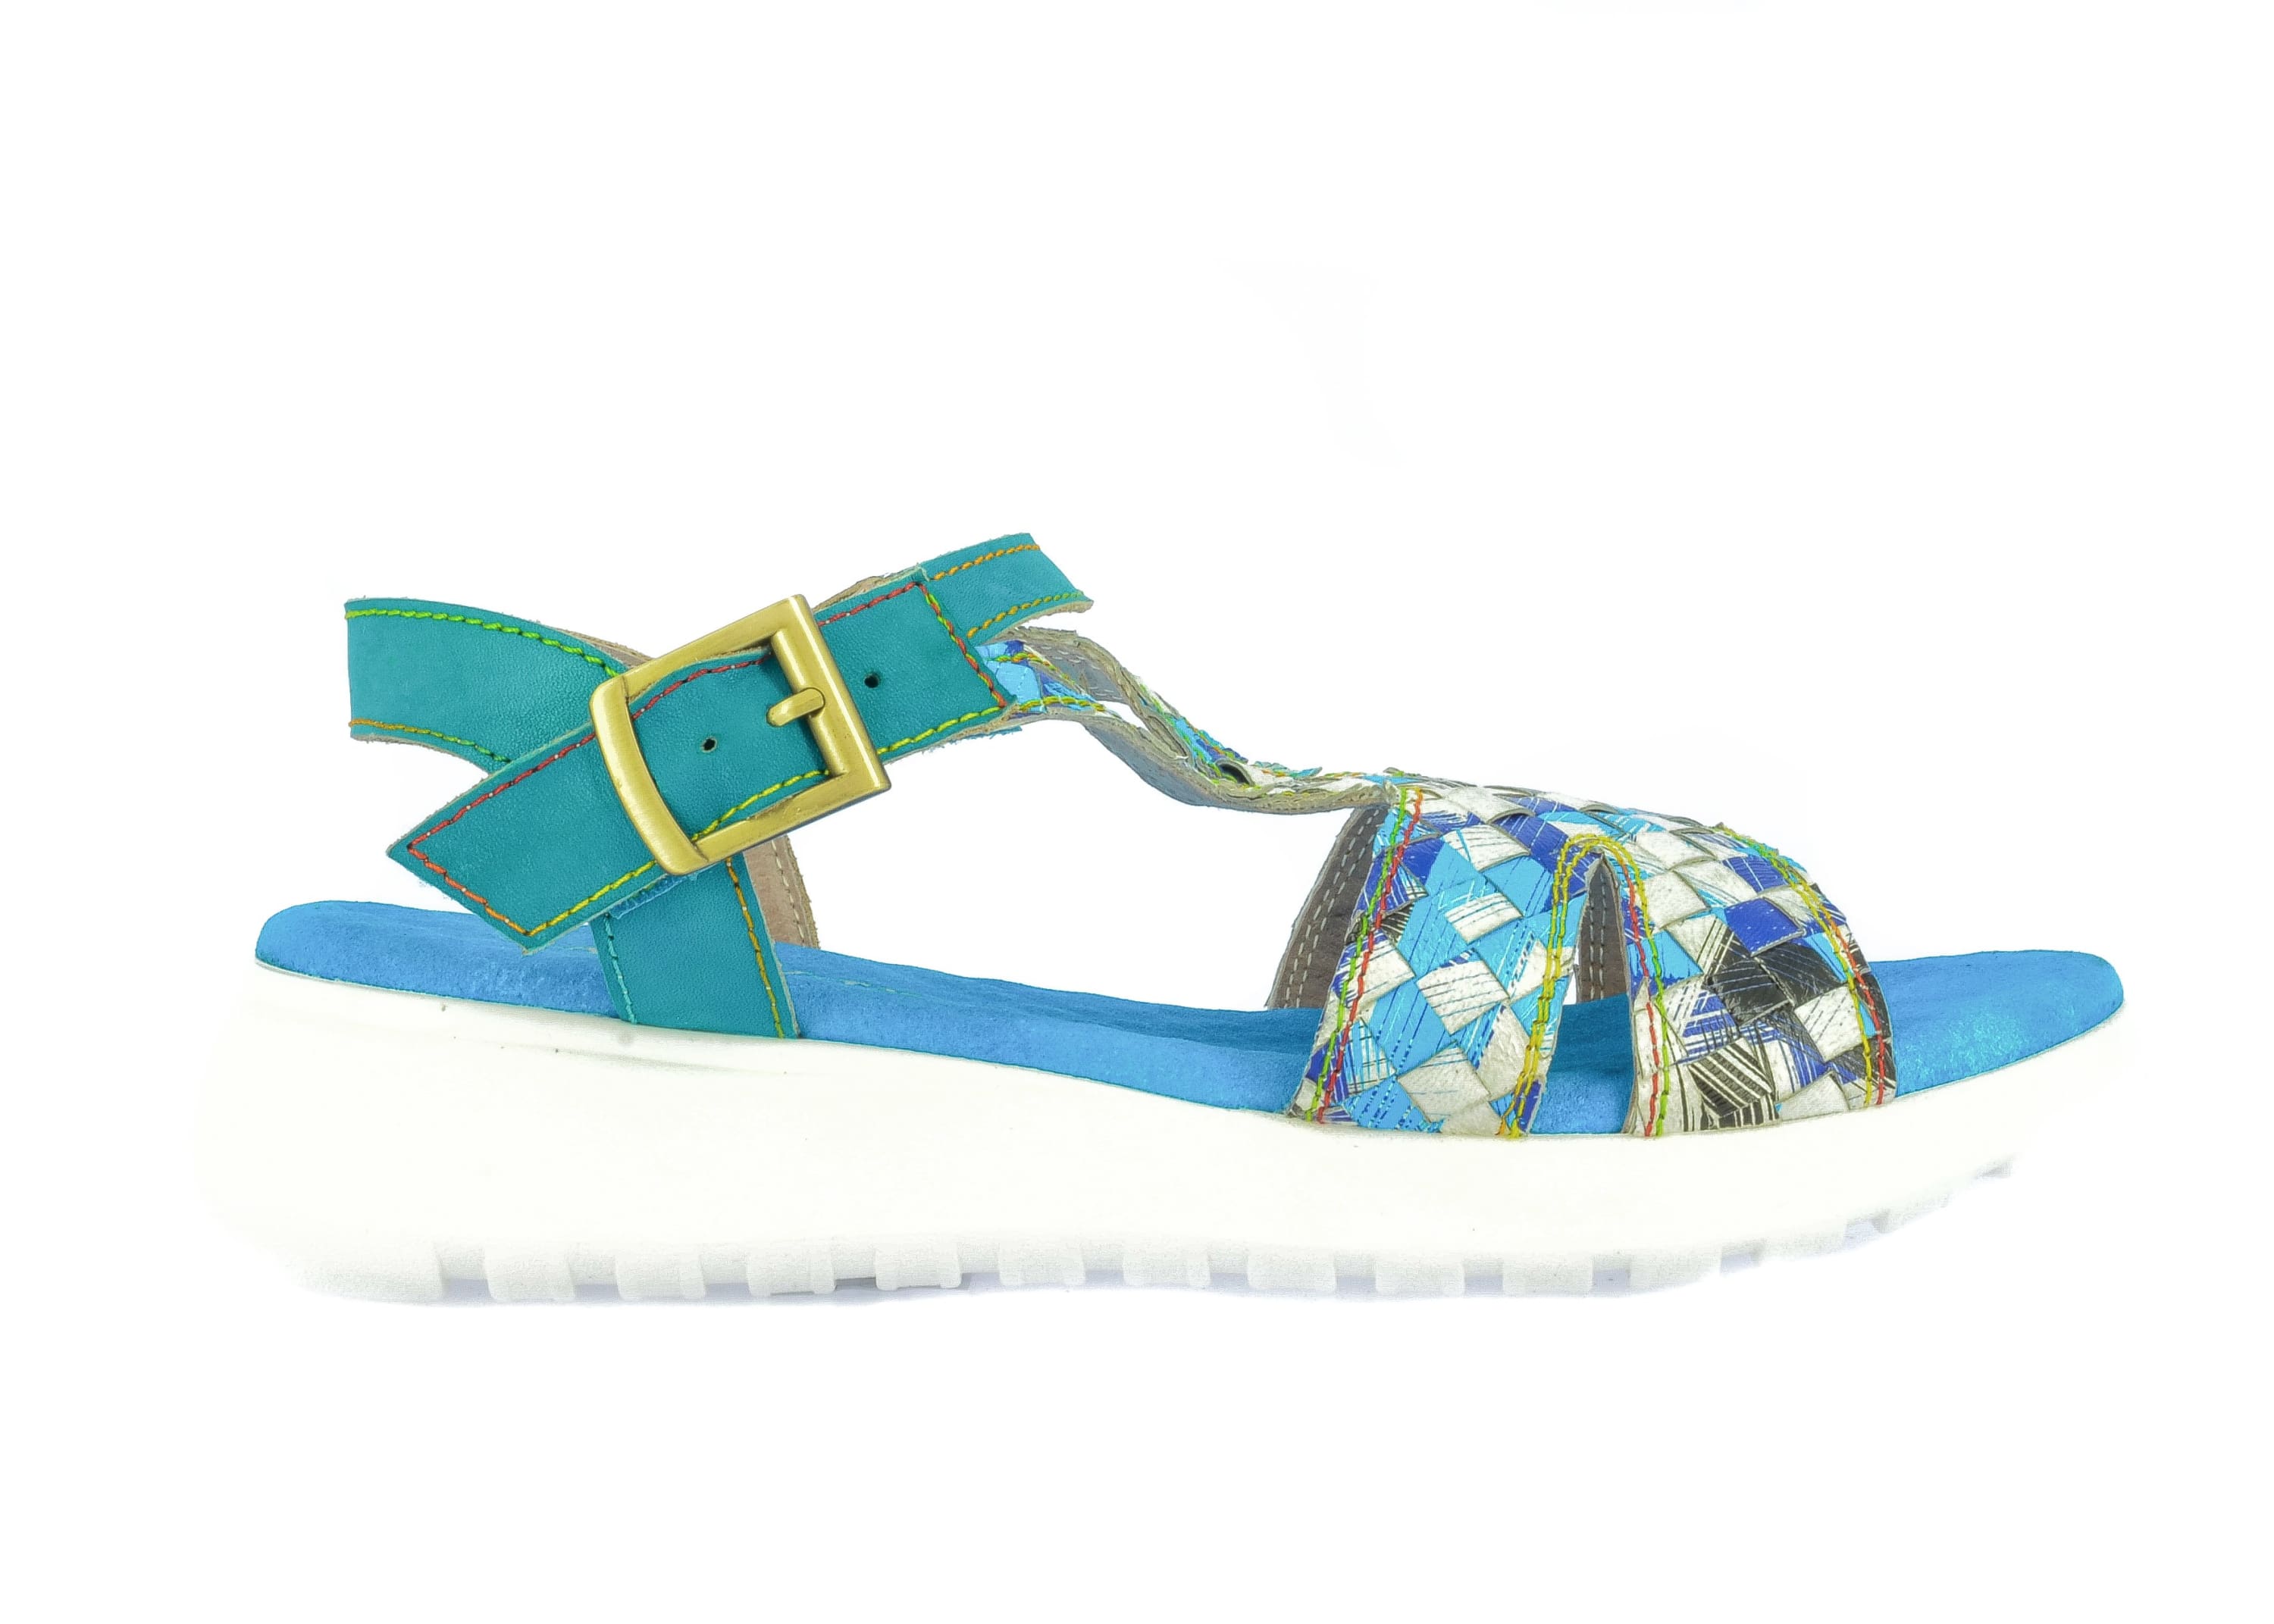 Chaussure FACLAISEO01 - 35 / TURQUOISE - Sandale